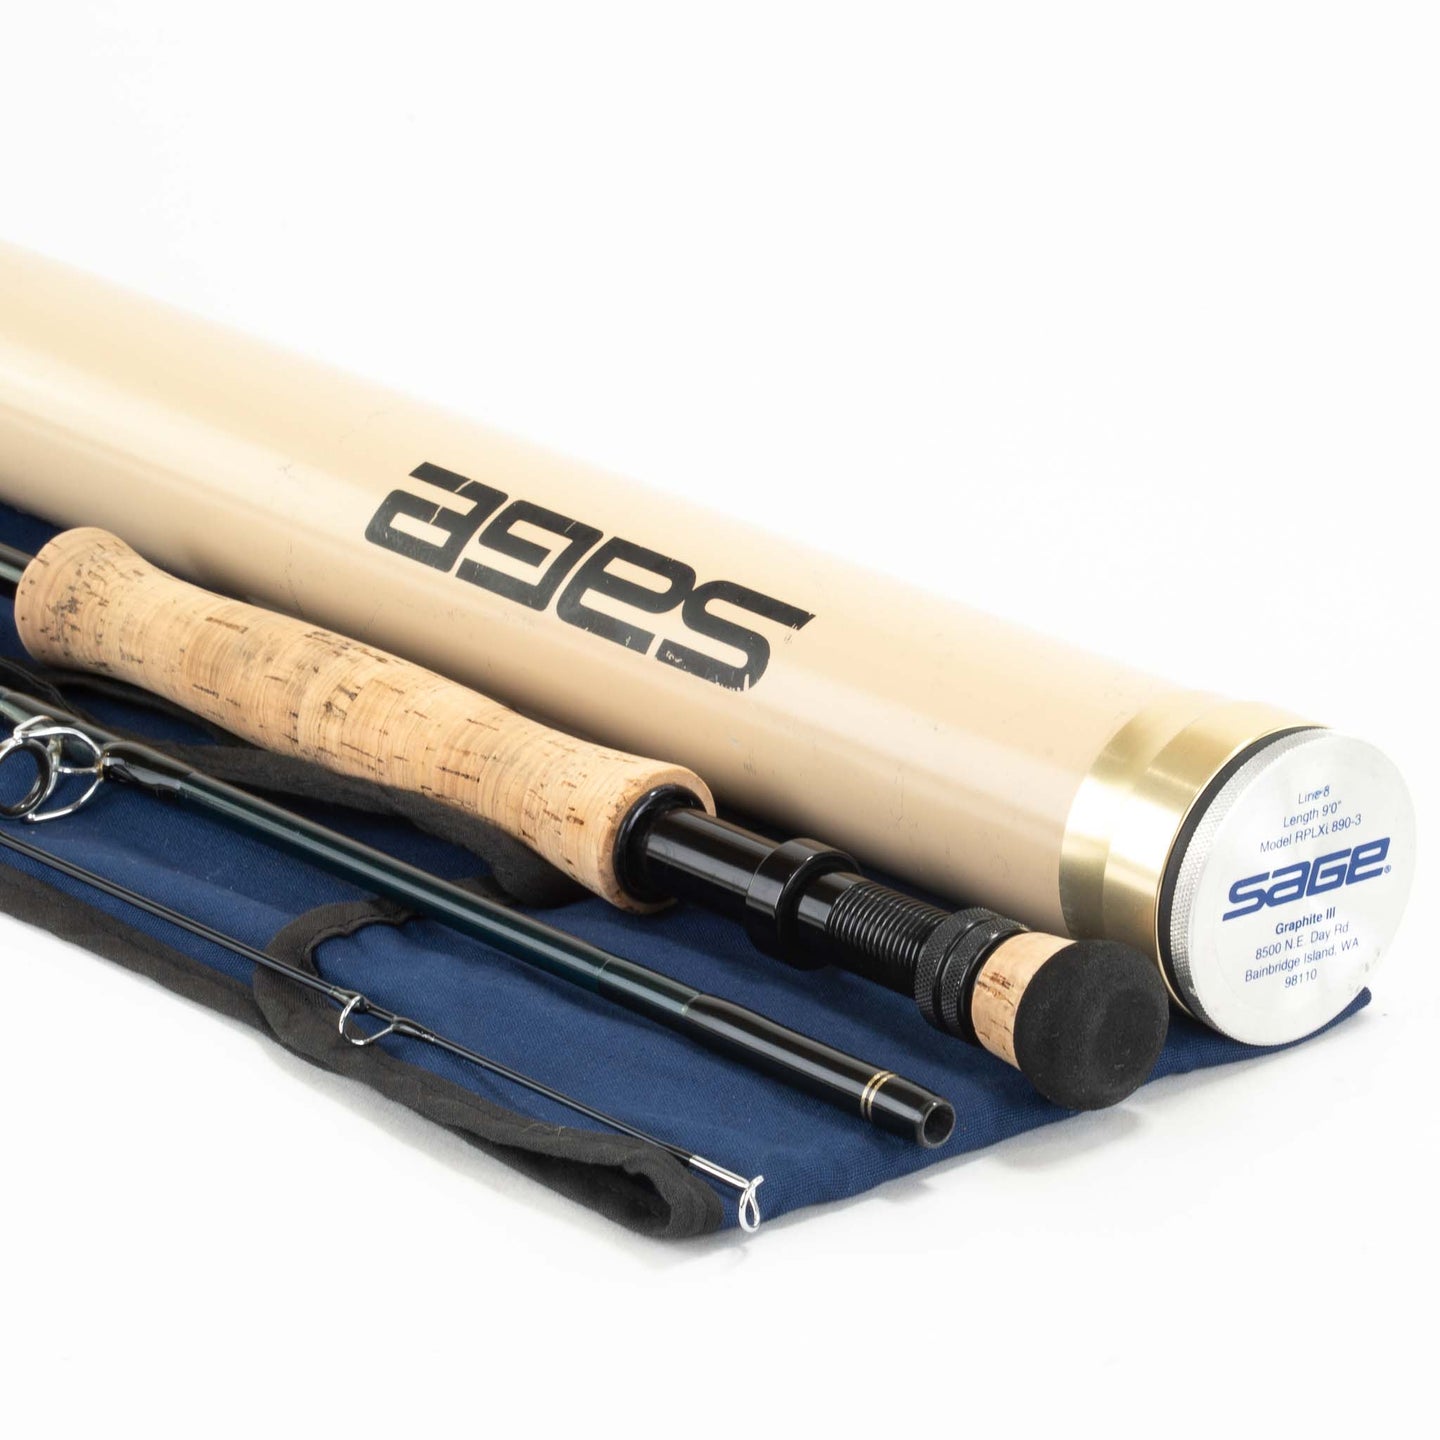 Sage RPLXi 890-3 Fly Rod - 8wt 9ft 0in 3pc